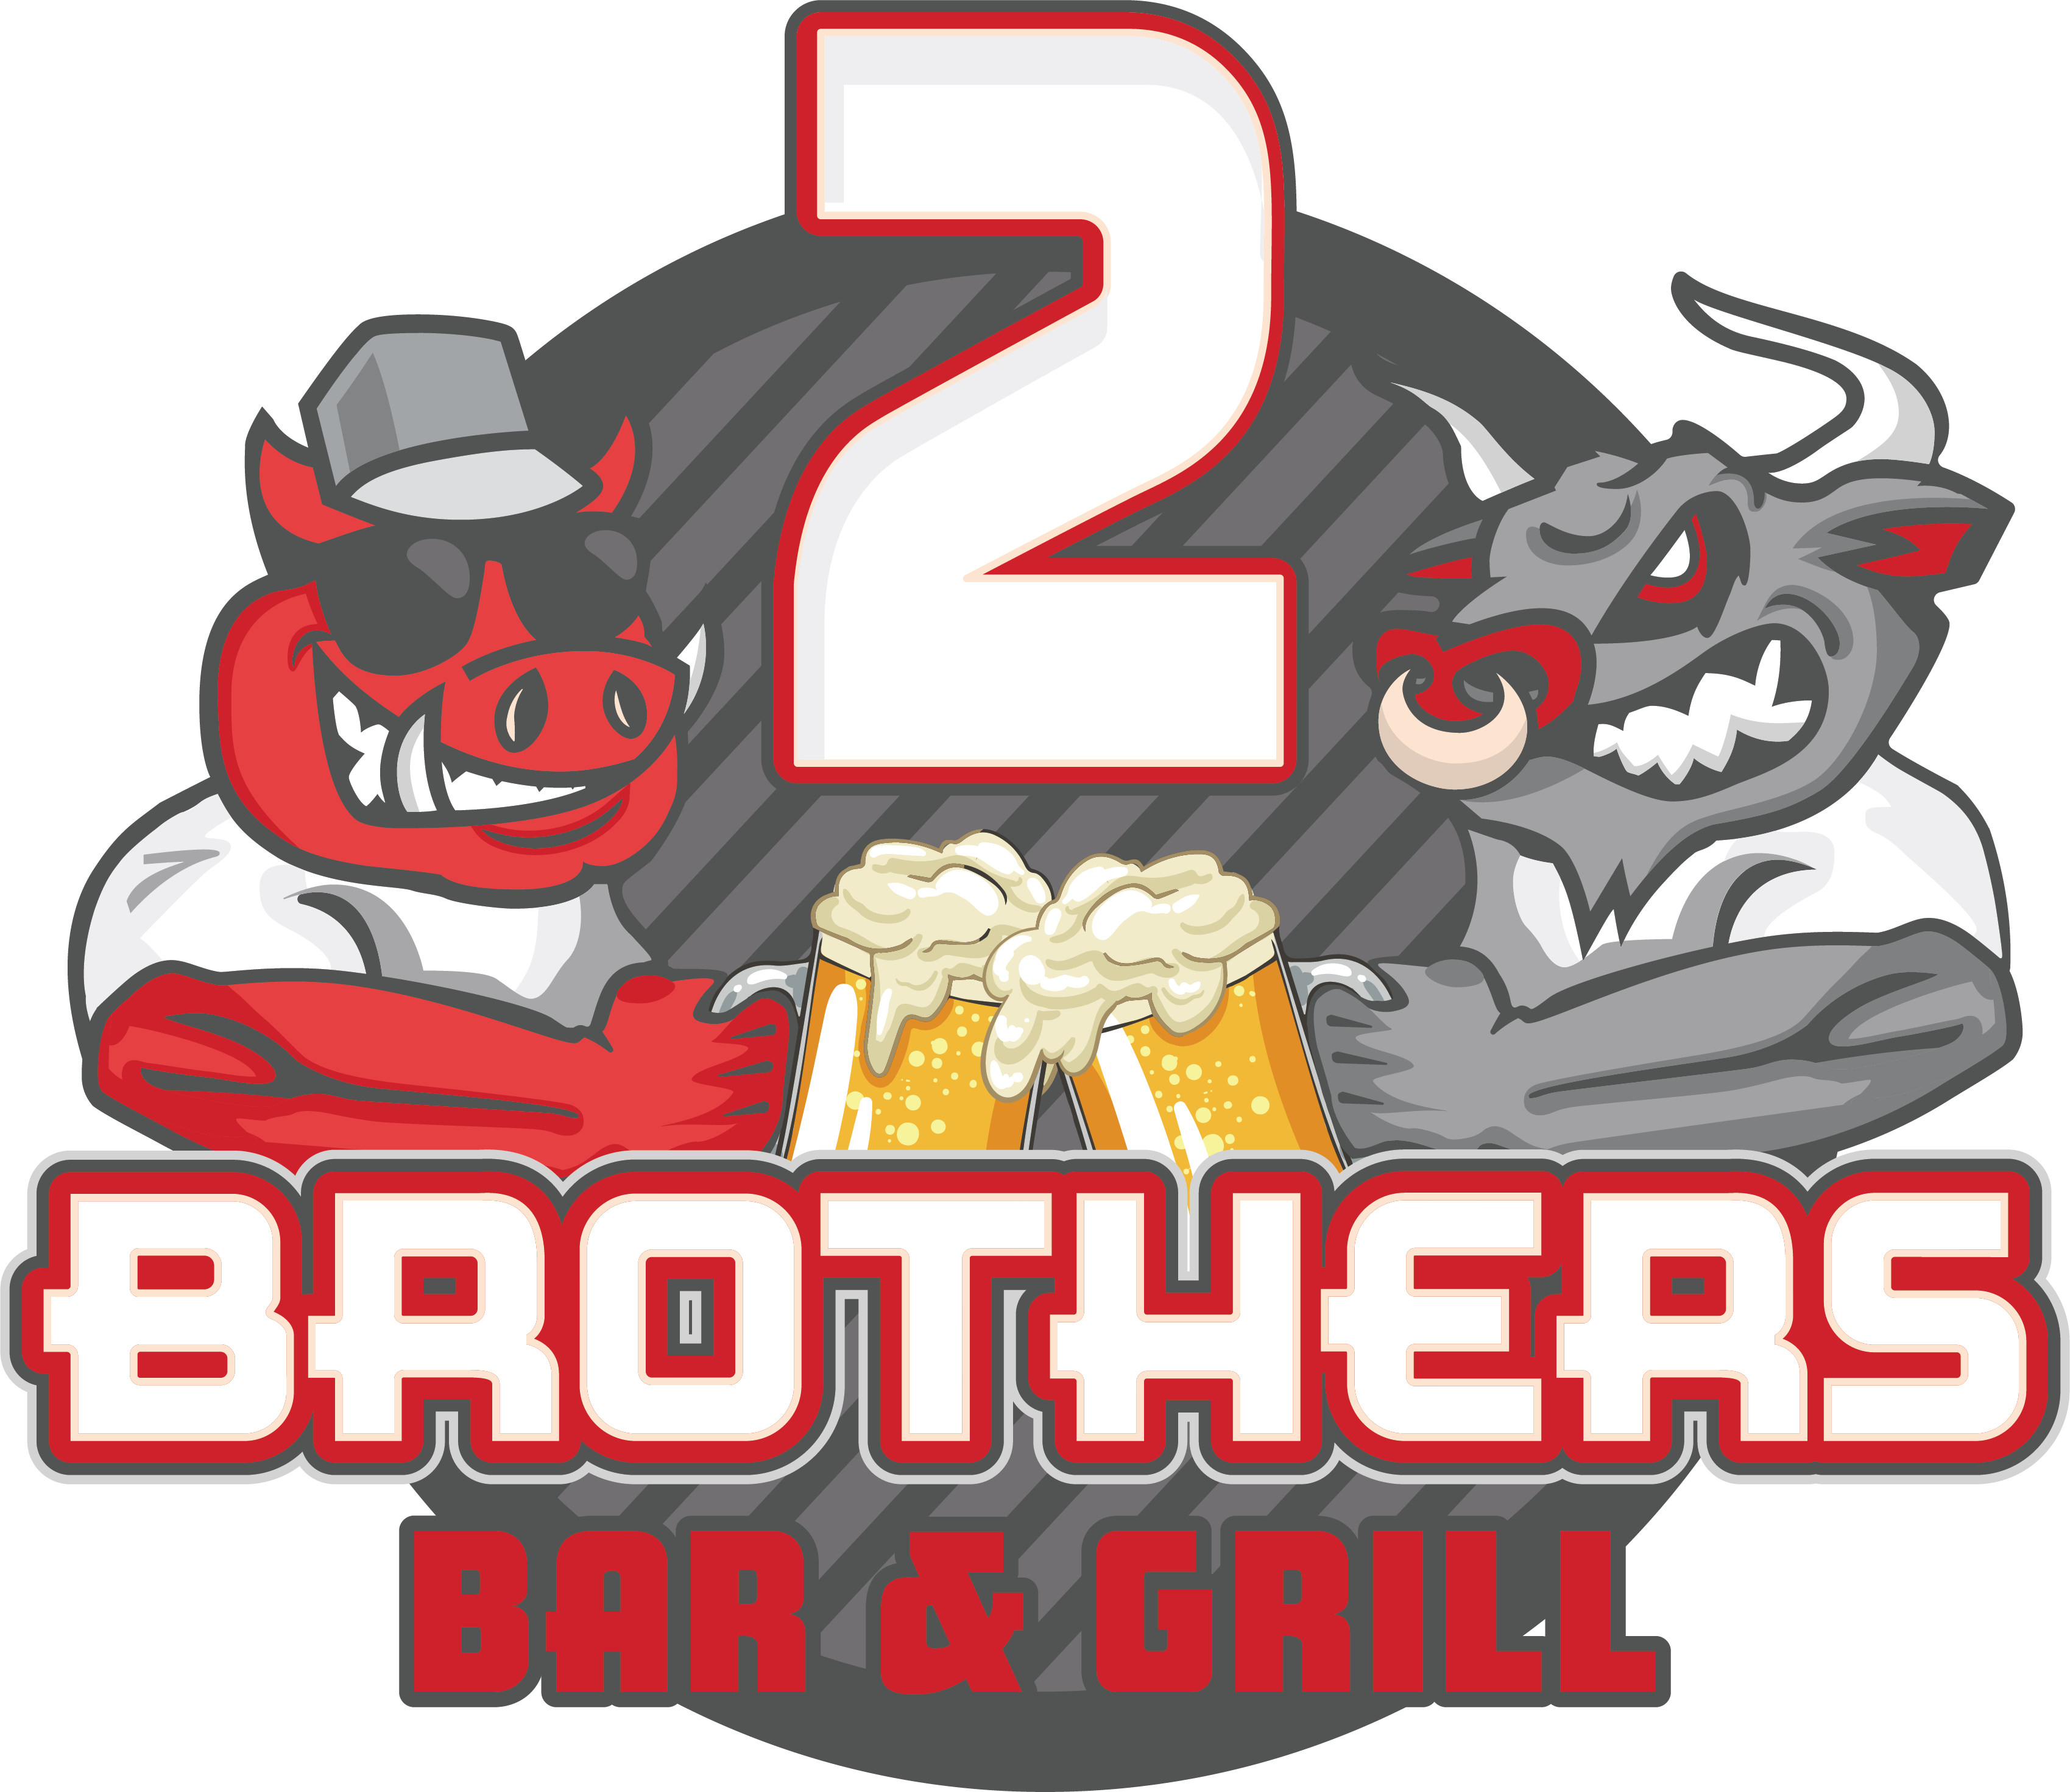 - 2 Brothers Bar & Grill